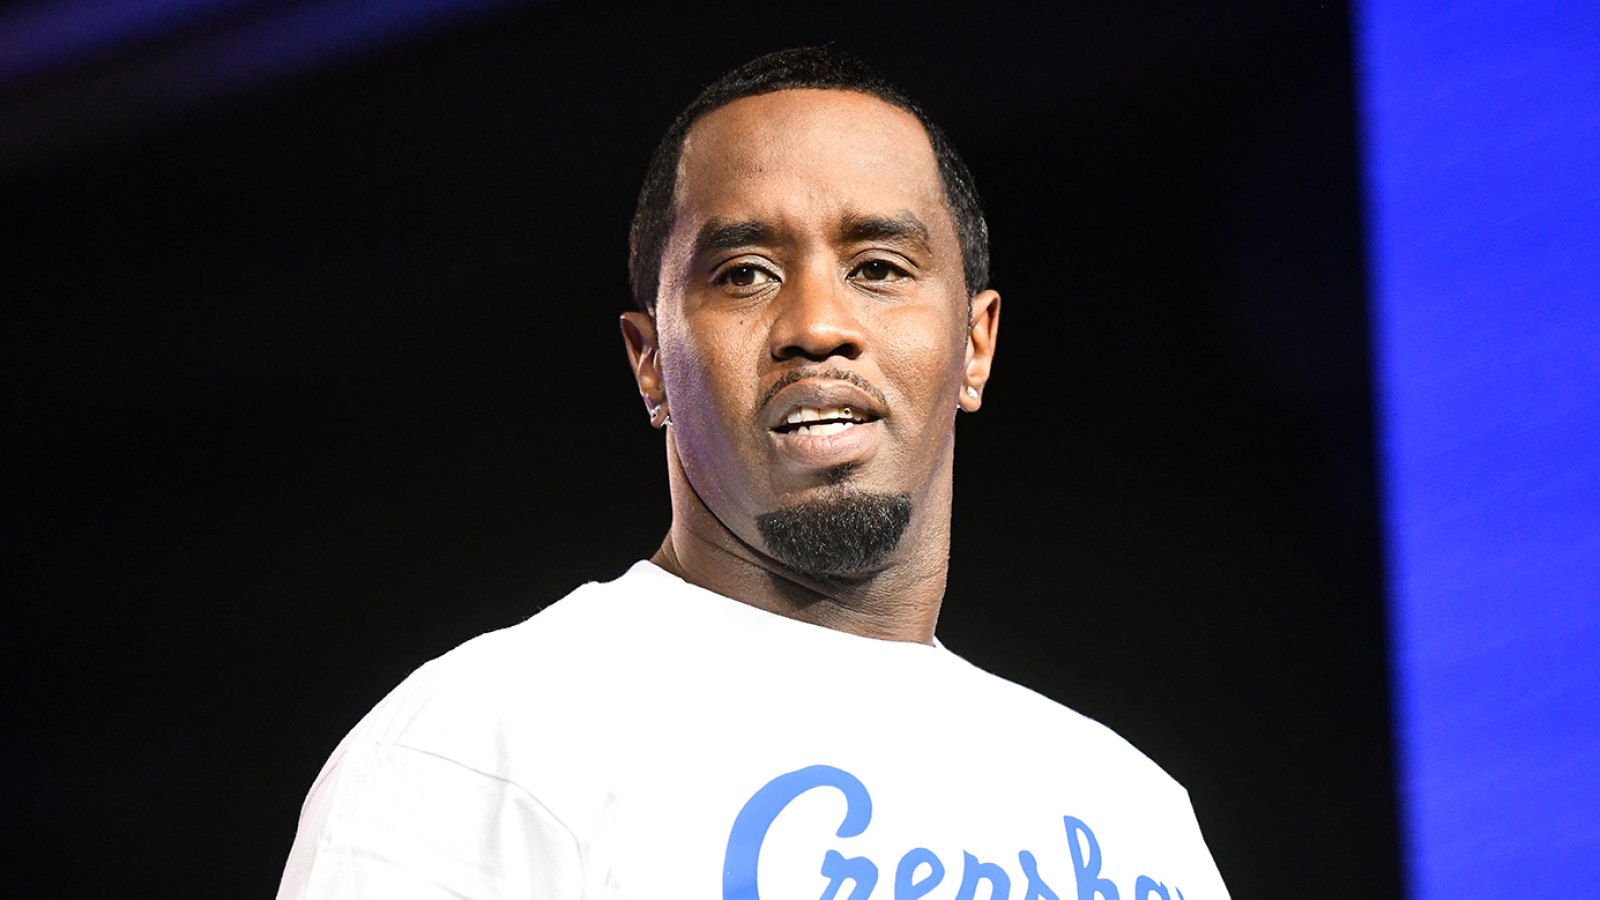 Diddy Accused of Sexual Assaulting College Student, Distributing 'Revenge Porn' in New Lawsuit